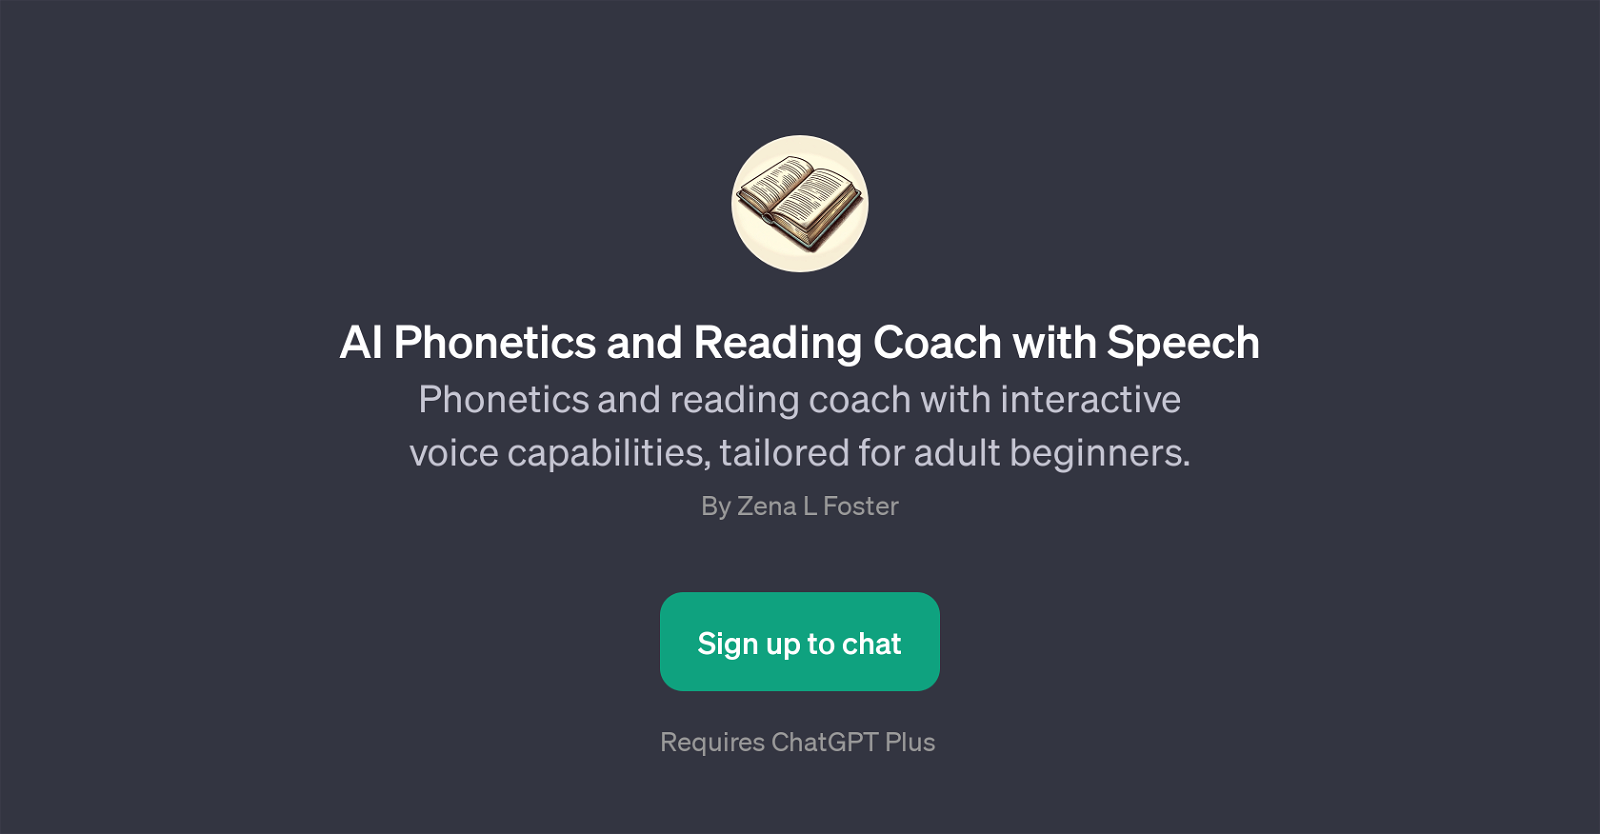 AI Phonetics and Reading Coach with Speech website